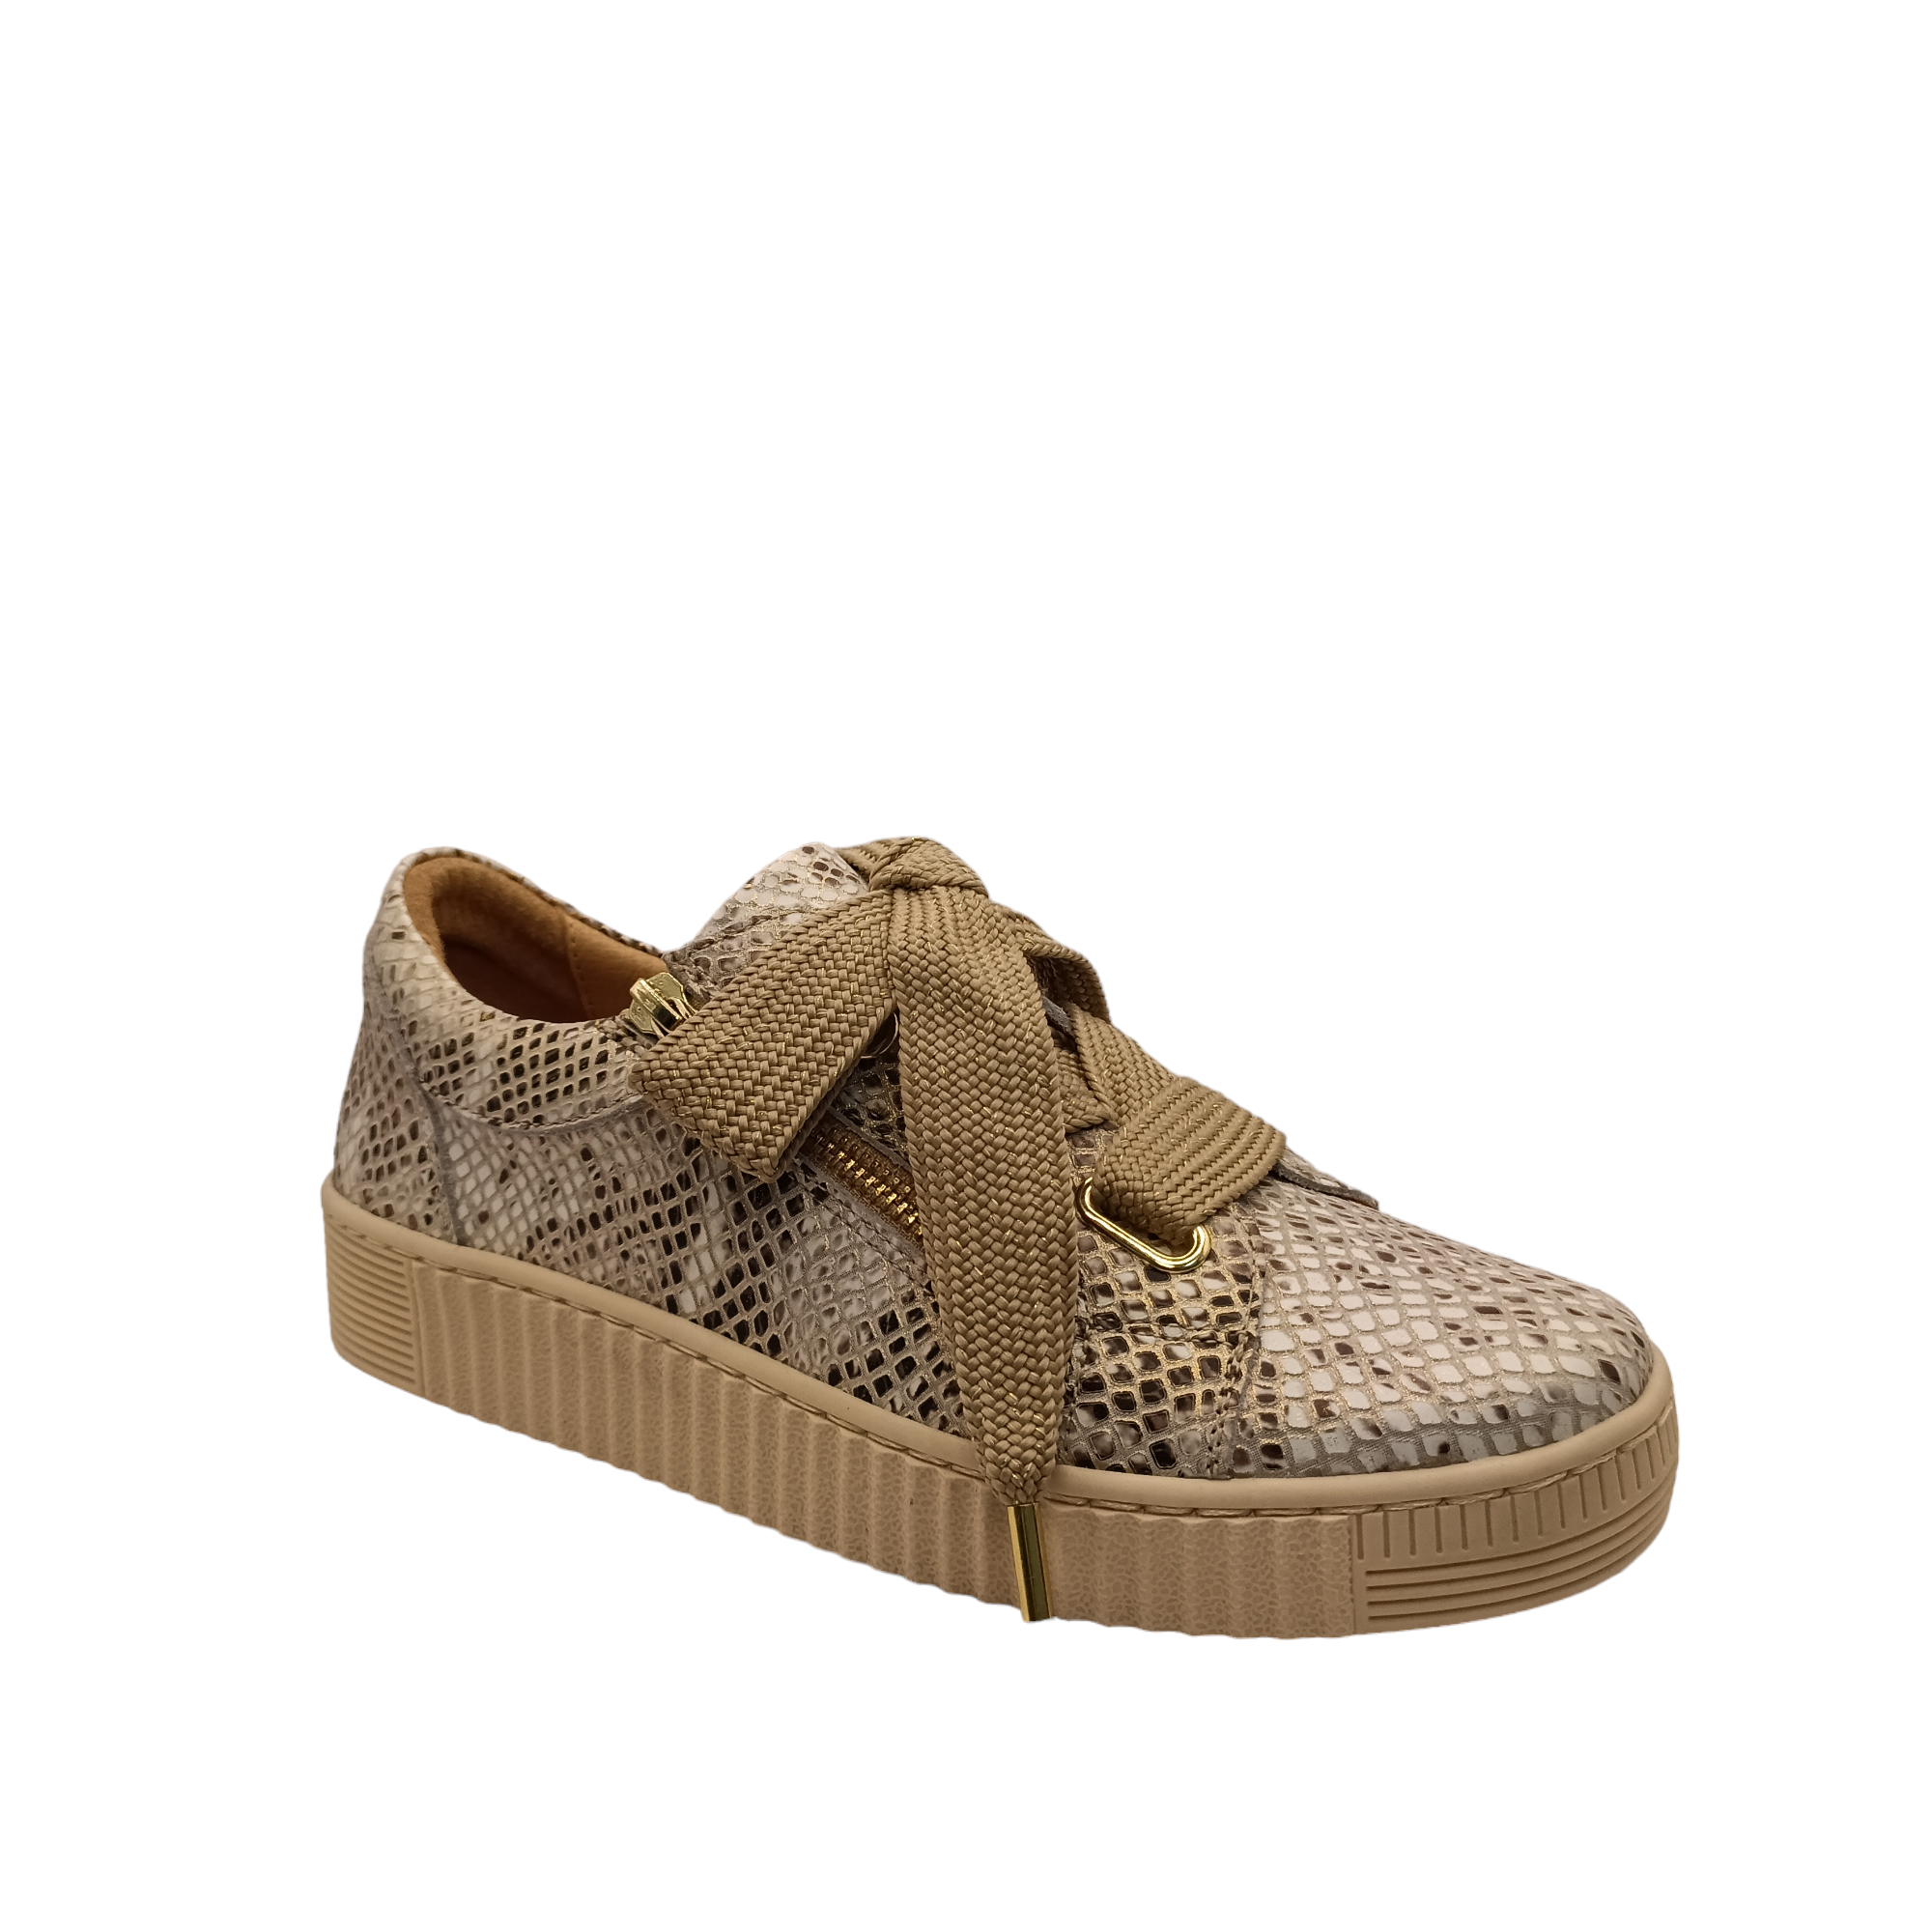 Shop Jovi 2 EOS - with shoe&amp;me - from EOS - Sneaker - Sneaker, Summer, Winter, Womens - [collection]